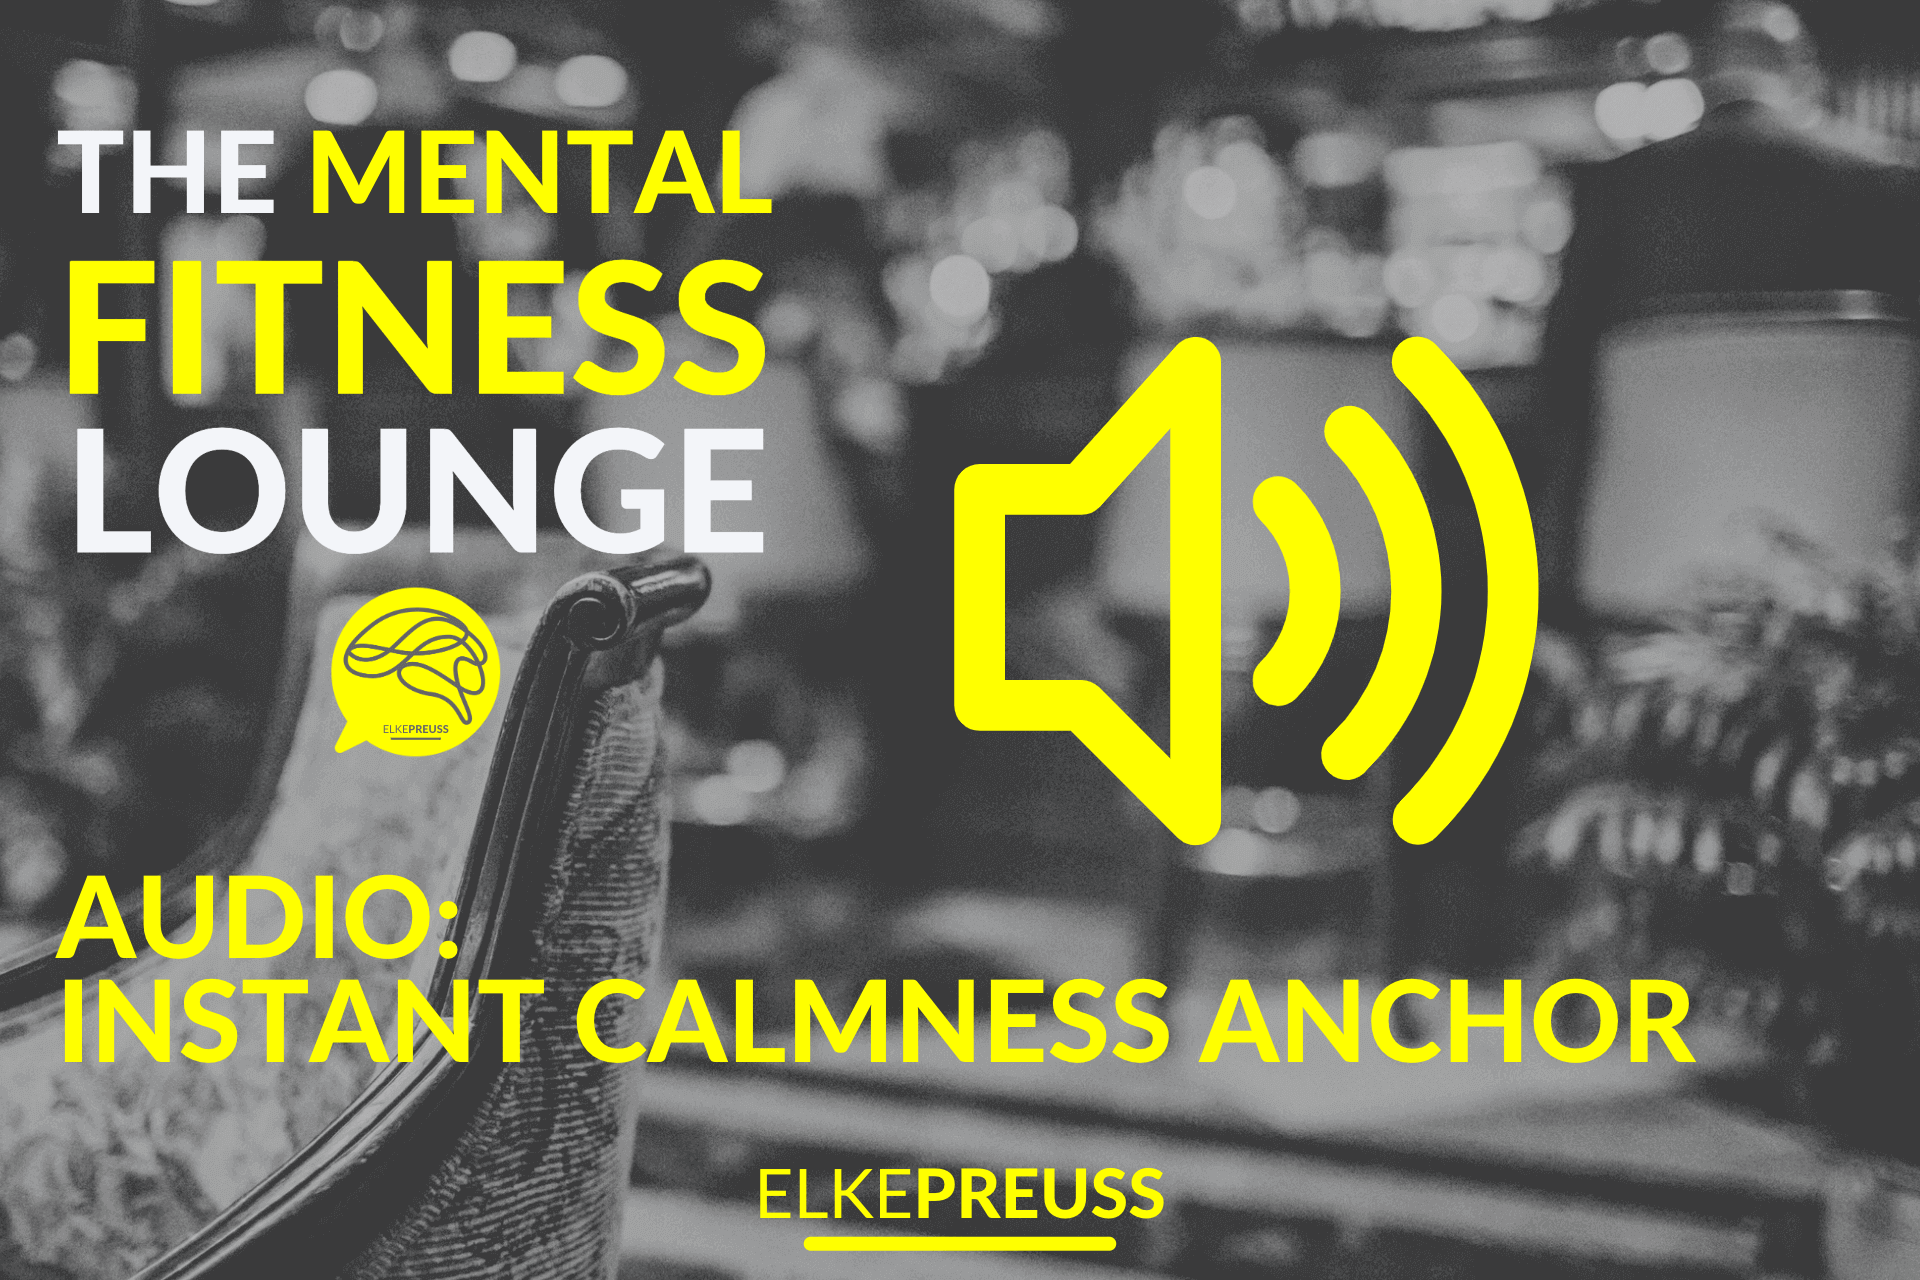 The mental fitness lounge Instant calmness anchor